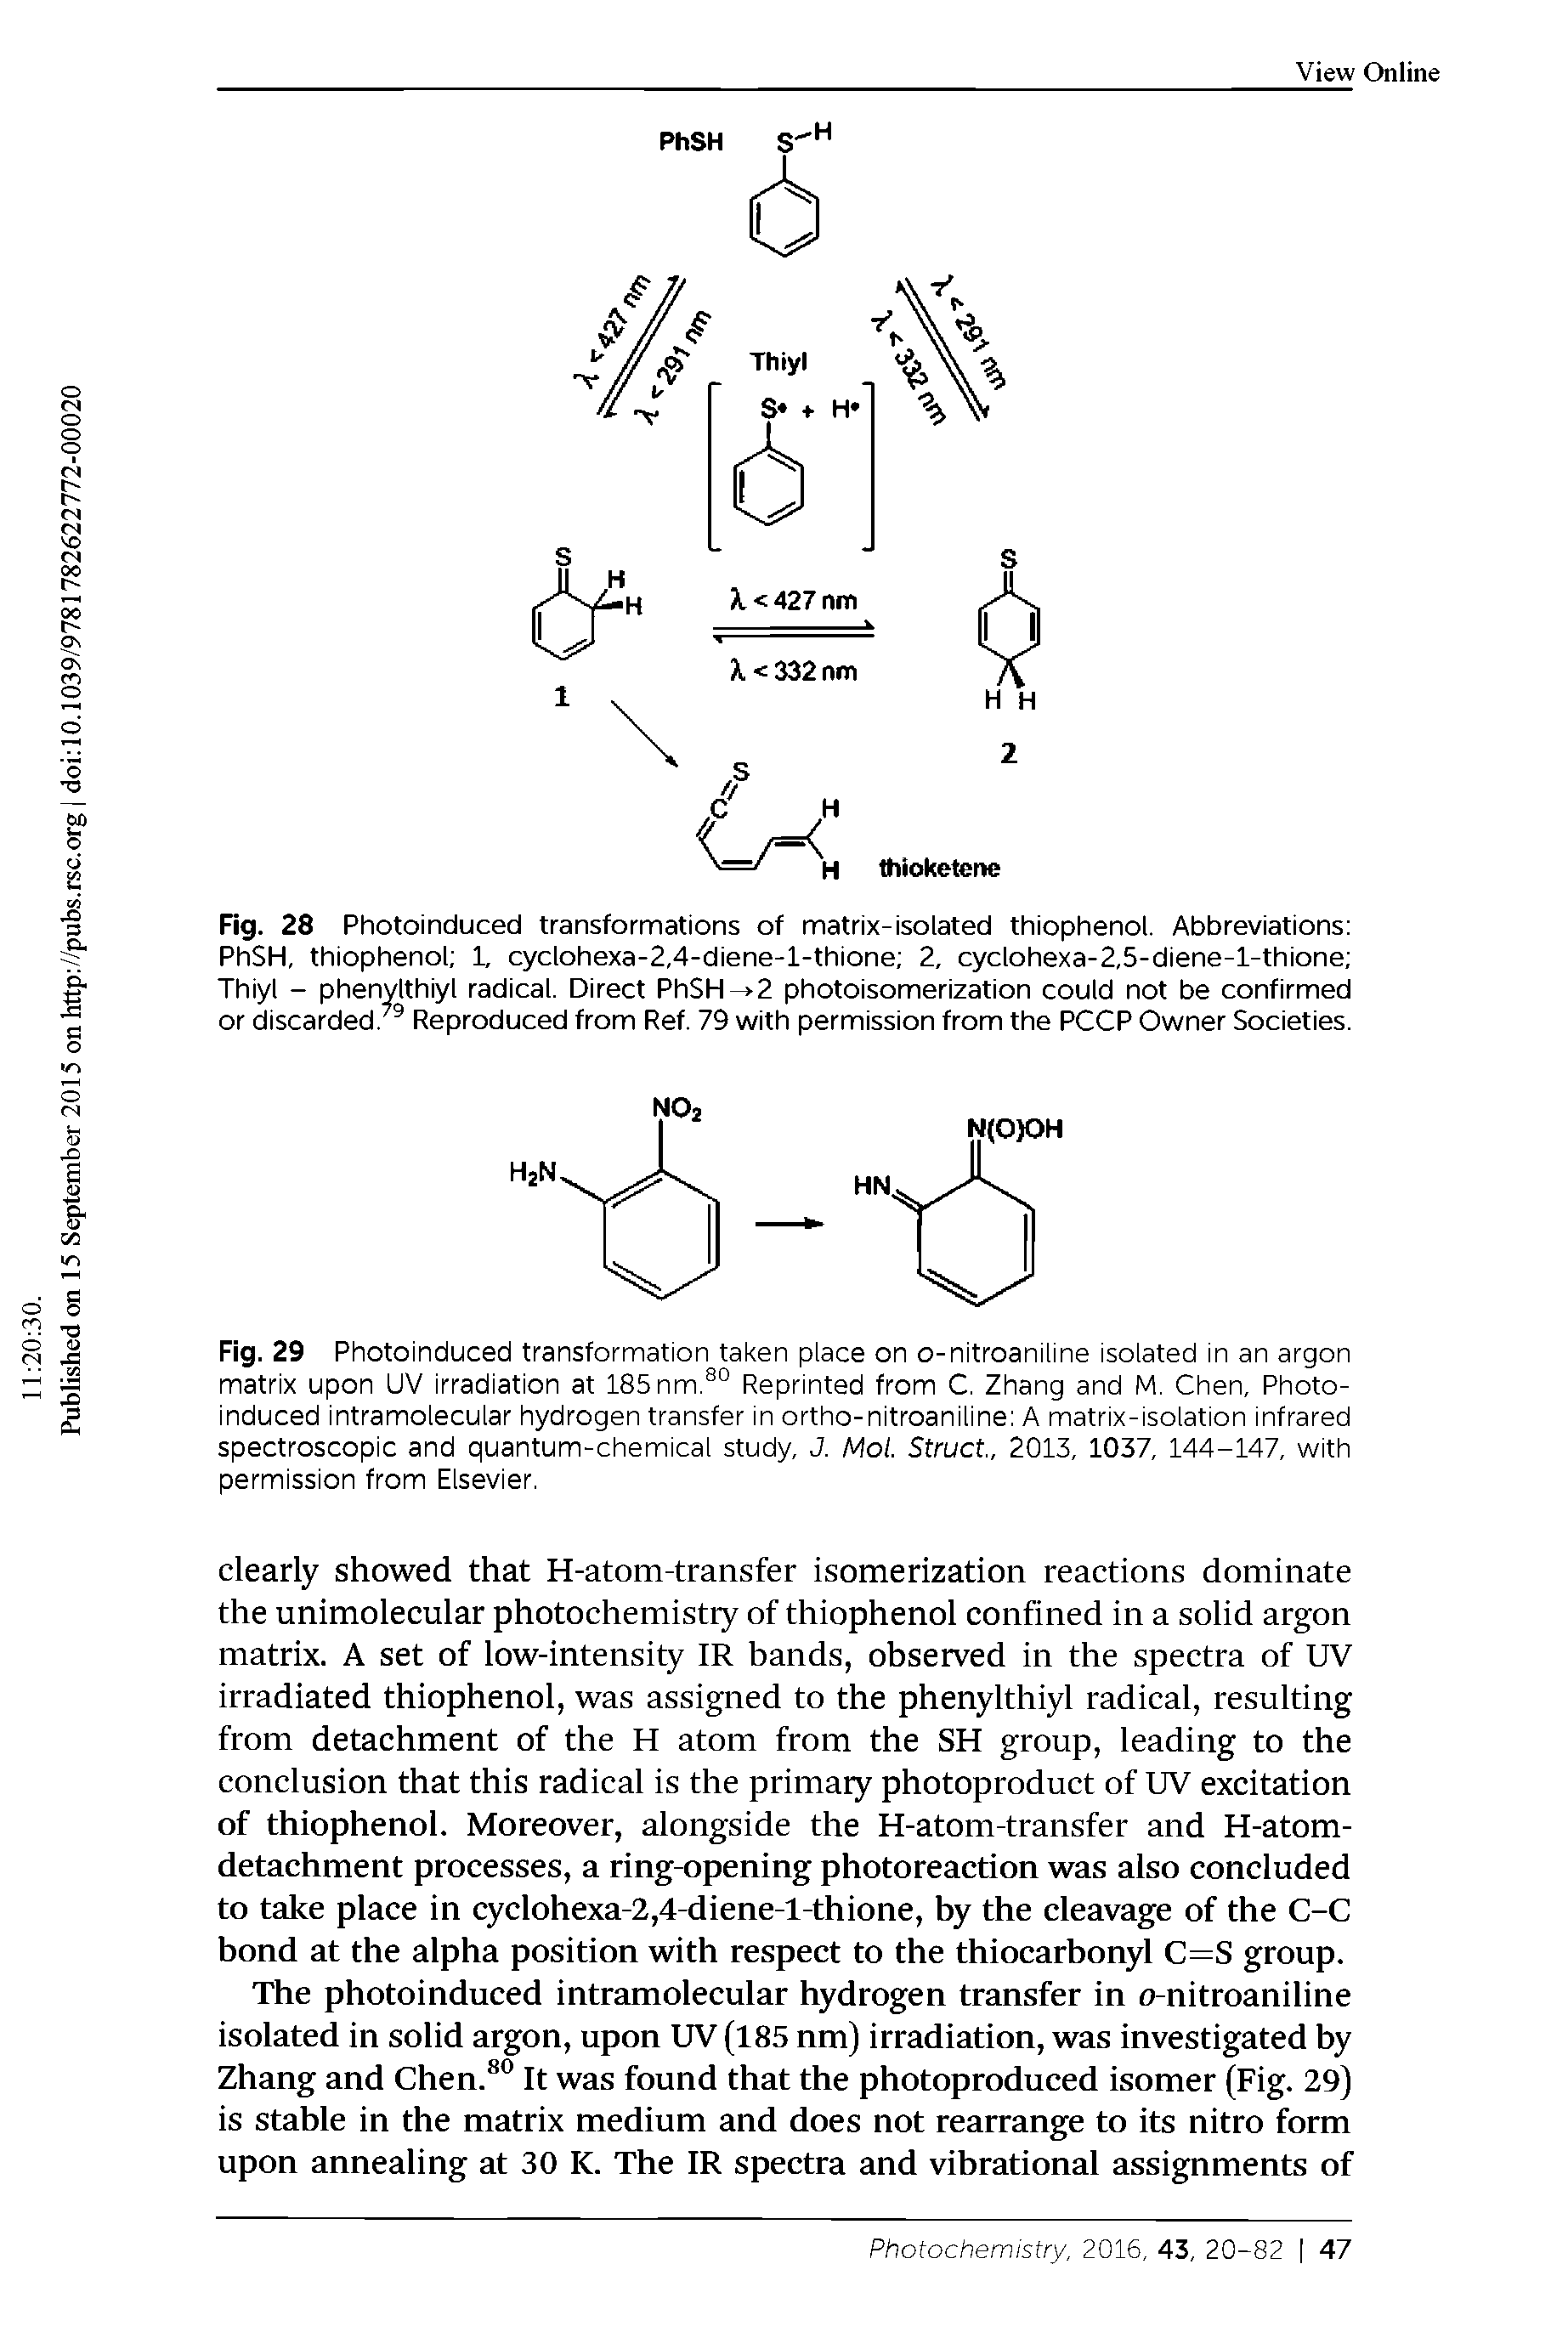 Fig. 29 Photoinduced transformation taken place on o-nitroaniline isolated in an argon matrix upon UV irradiation at 185nm. ° Reprinted from C. Zhang and M. Chen, Photoinduced intramolecular hydrogen transfer in ortho-nitroaniline A matrix-isolation infrared spectroscopic and quantum-chemical study, J, Mol. Struct, 2013, 1037, 144-147, with permission from Elsevier,...